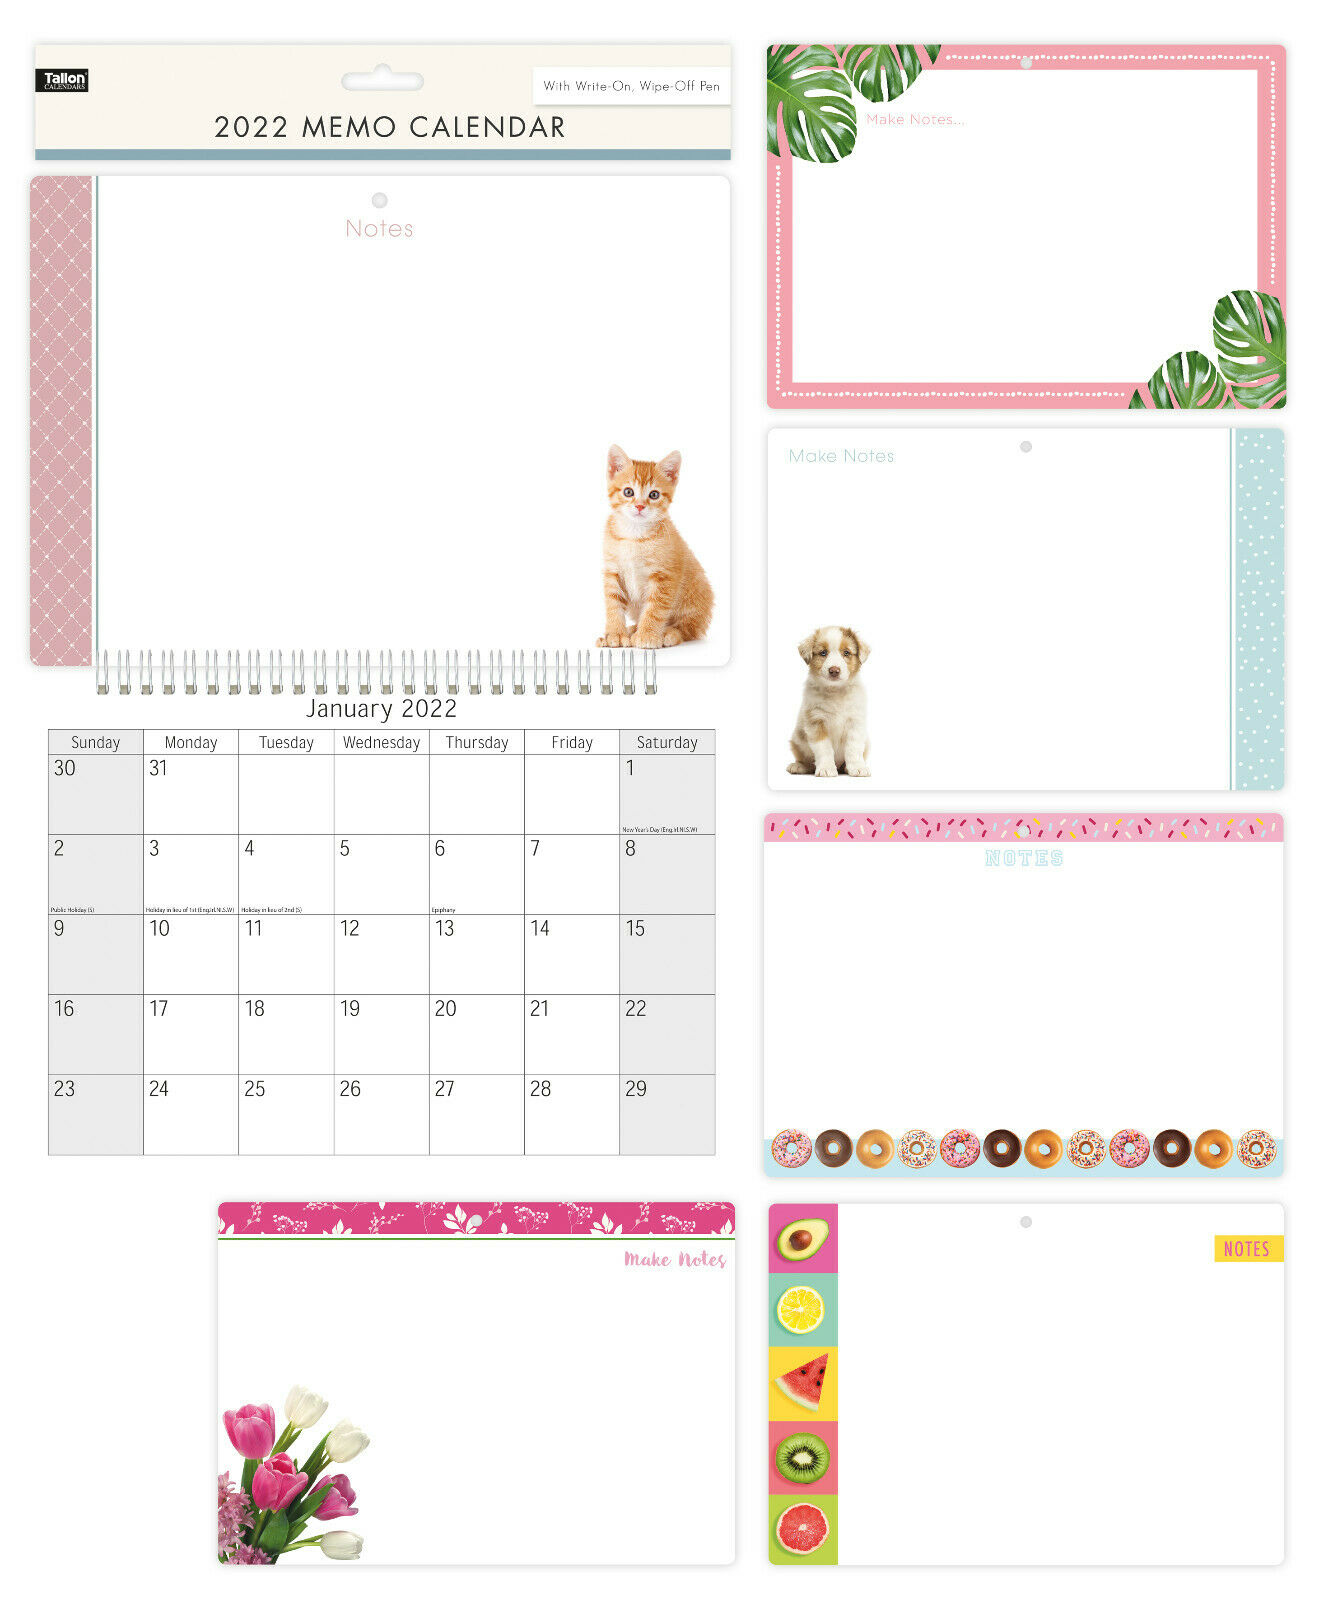 2021 New Monthly Memo Board Wall Calendar Family Organiser White Board With Pen.